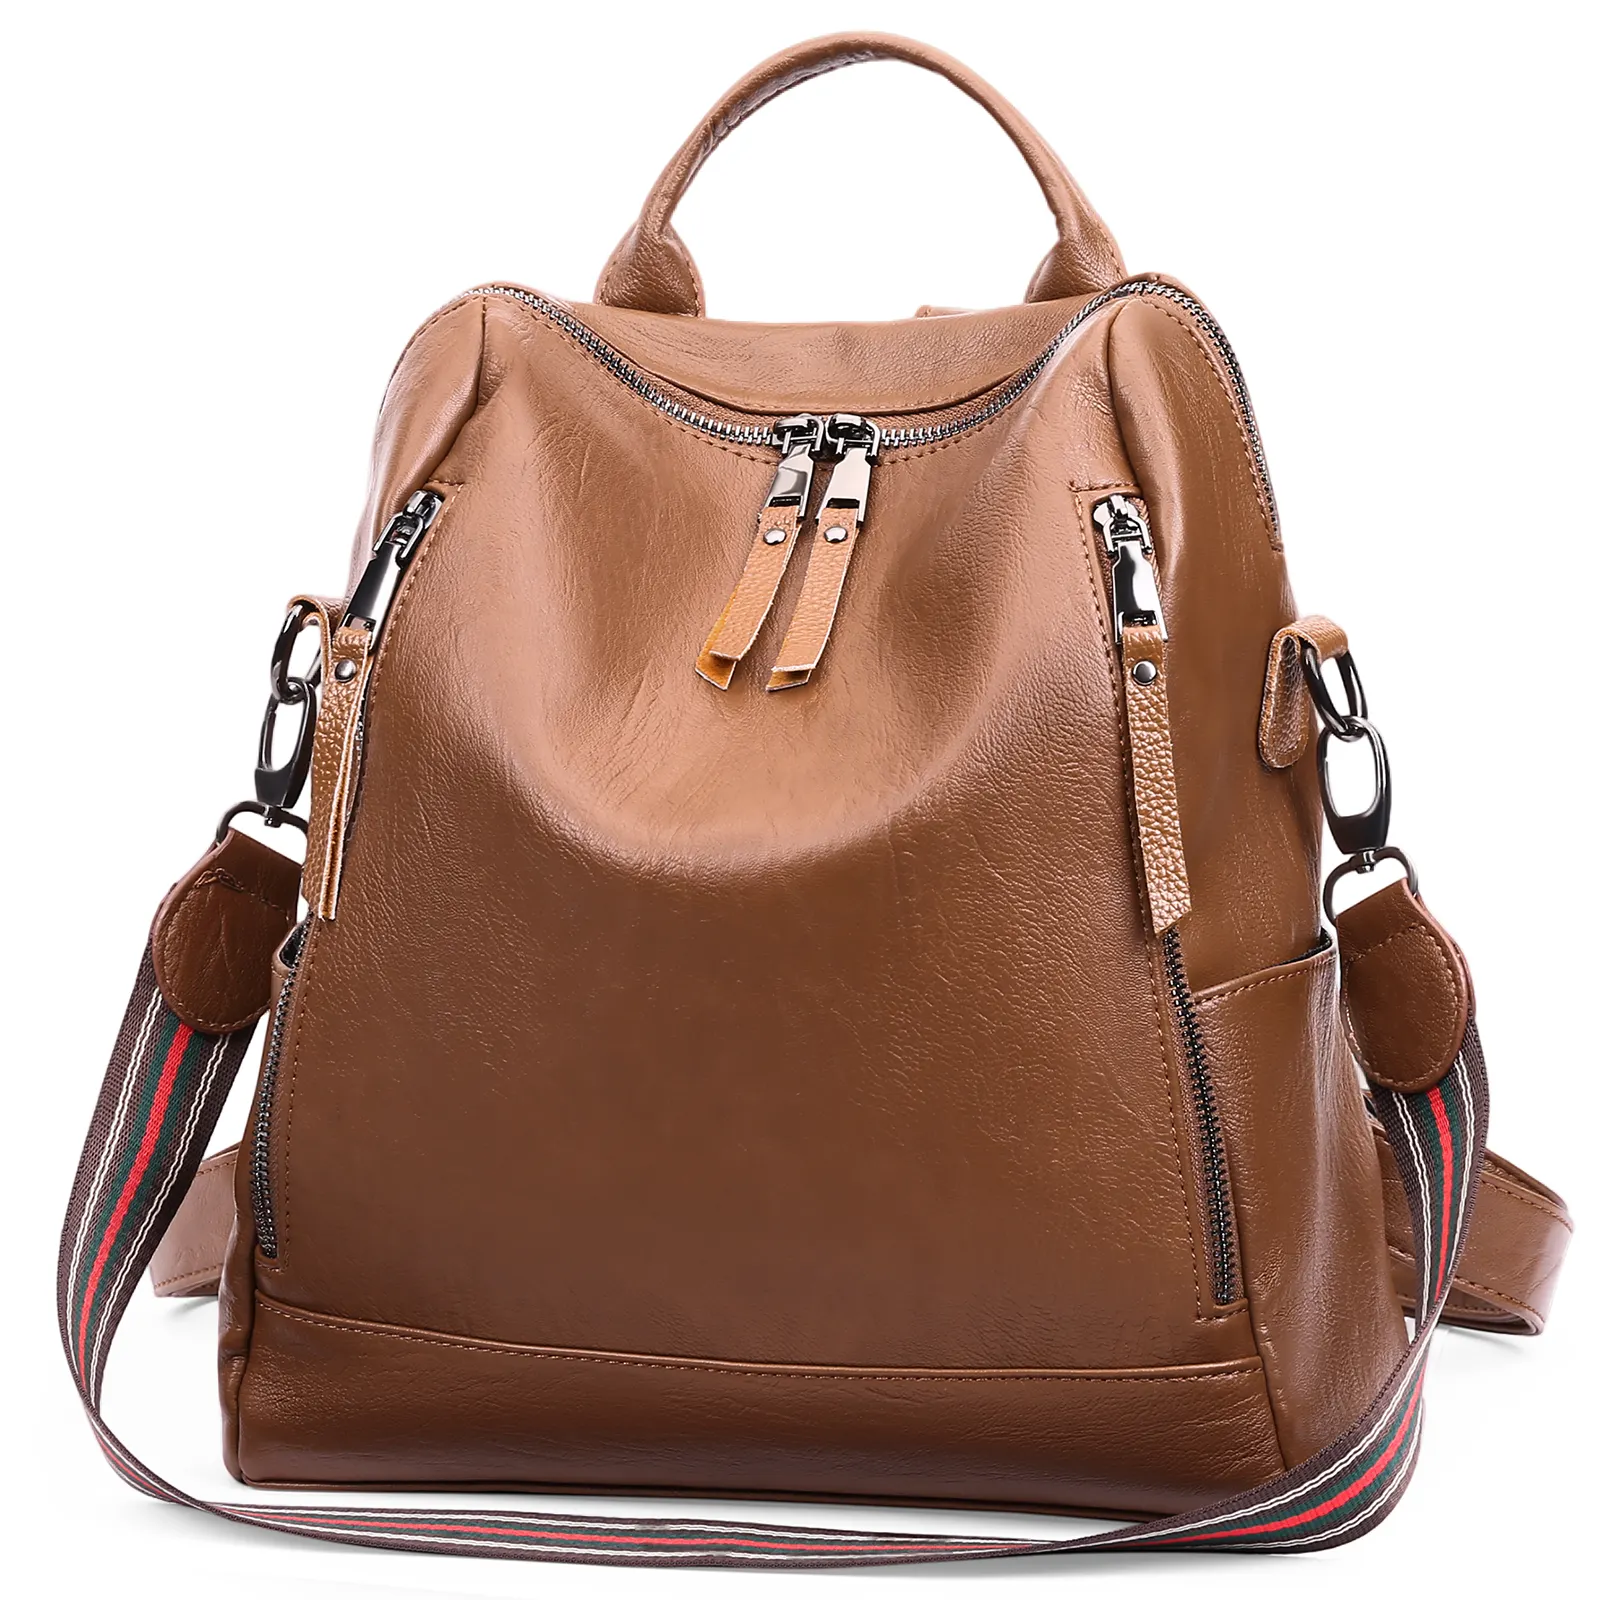 Backpack Purse For Women Leather Fashion Large Travel Ladies Convertible Casual Shoulder Bag